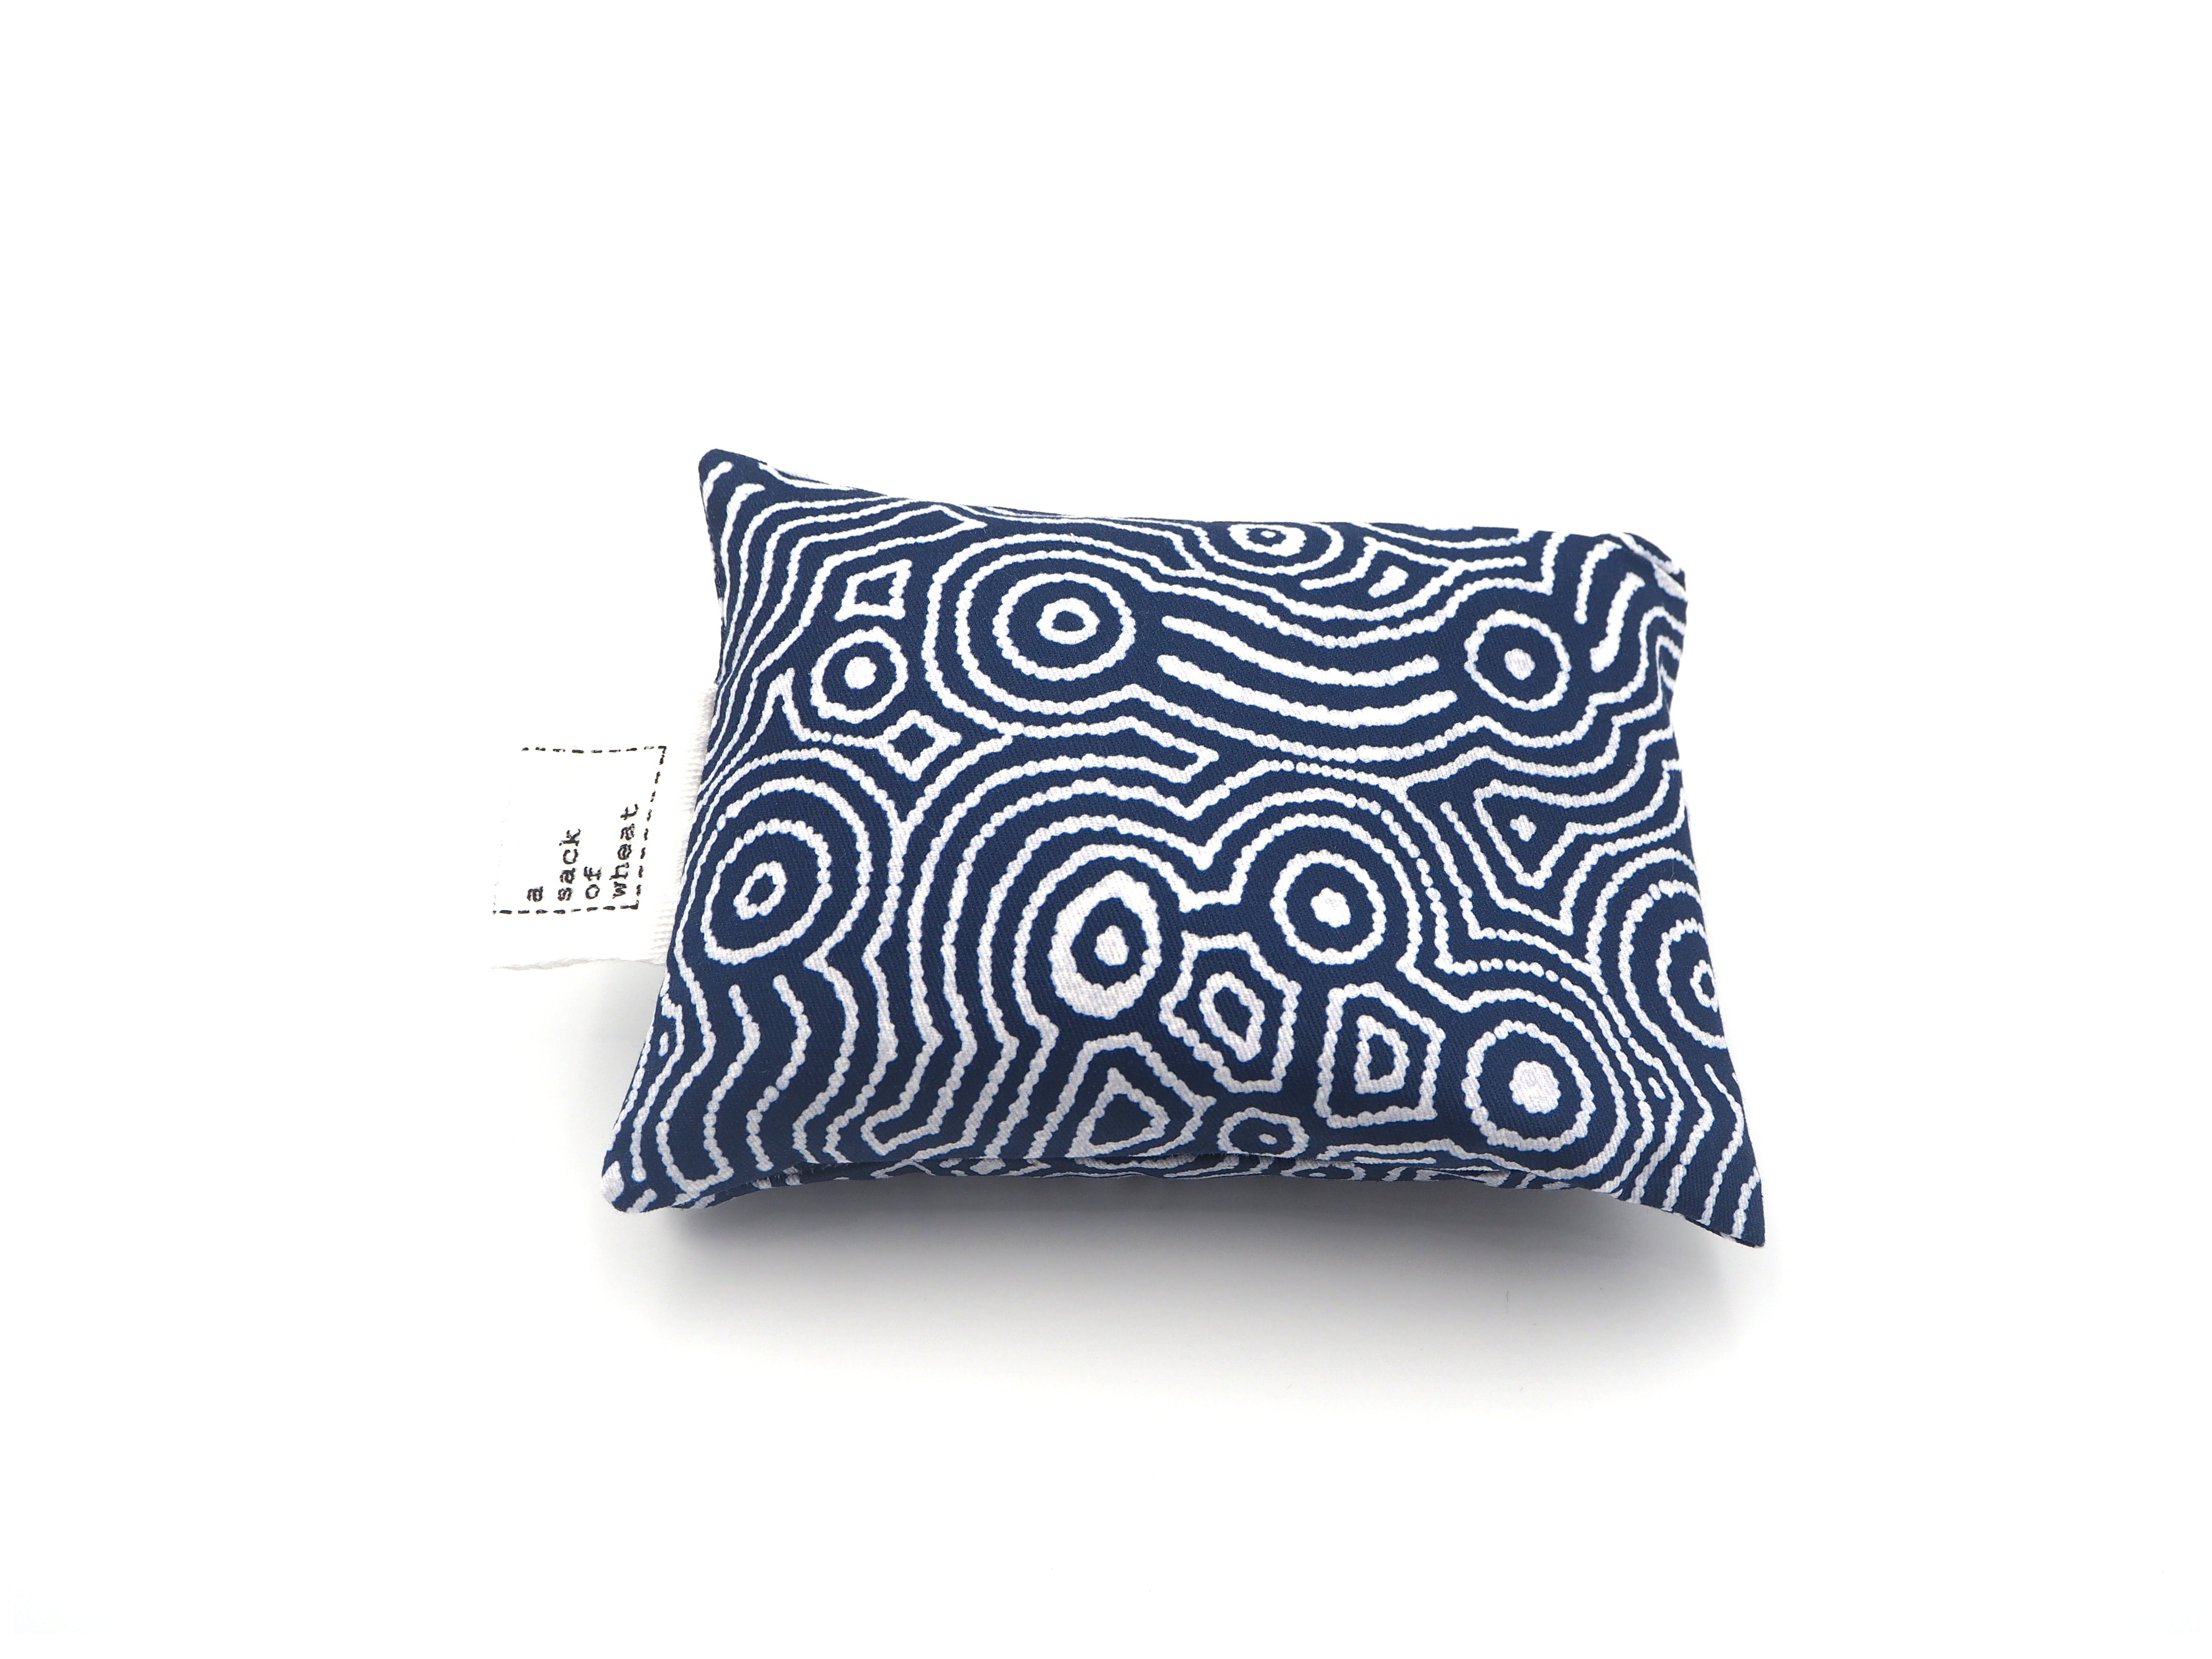 Folded view of A Sack Of Wheat, featuring blue & white dot painting pattern ,100% cotton fabric